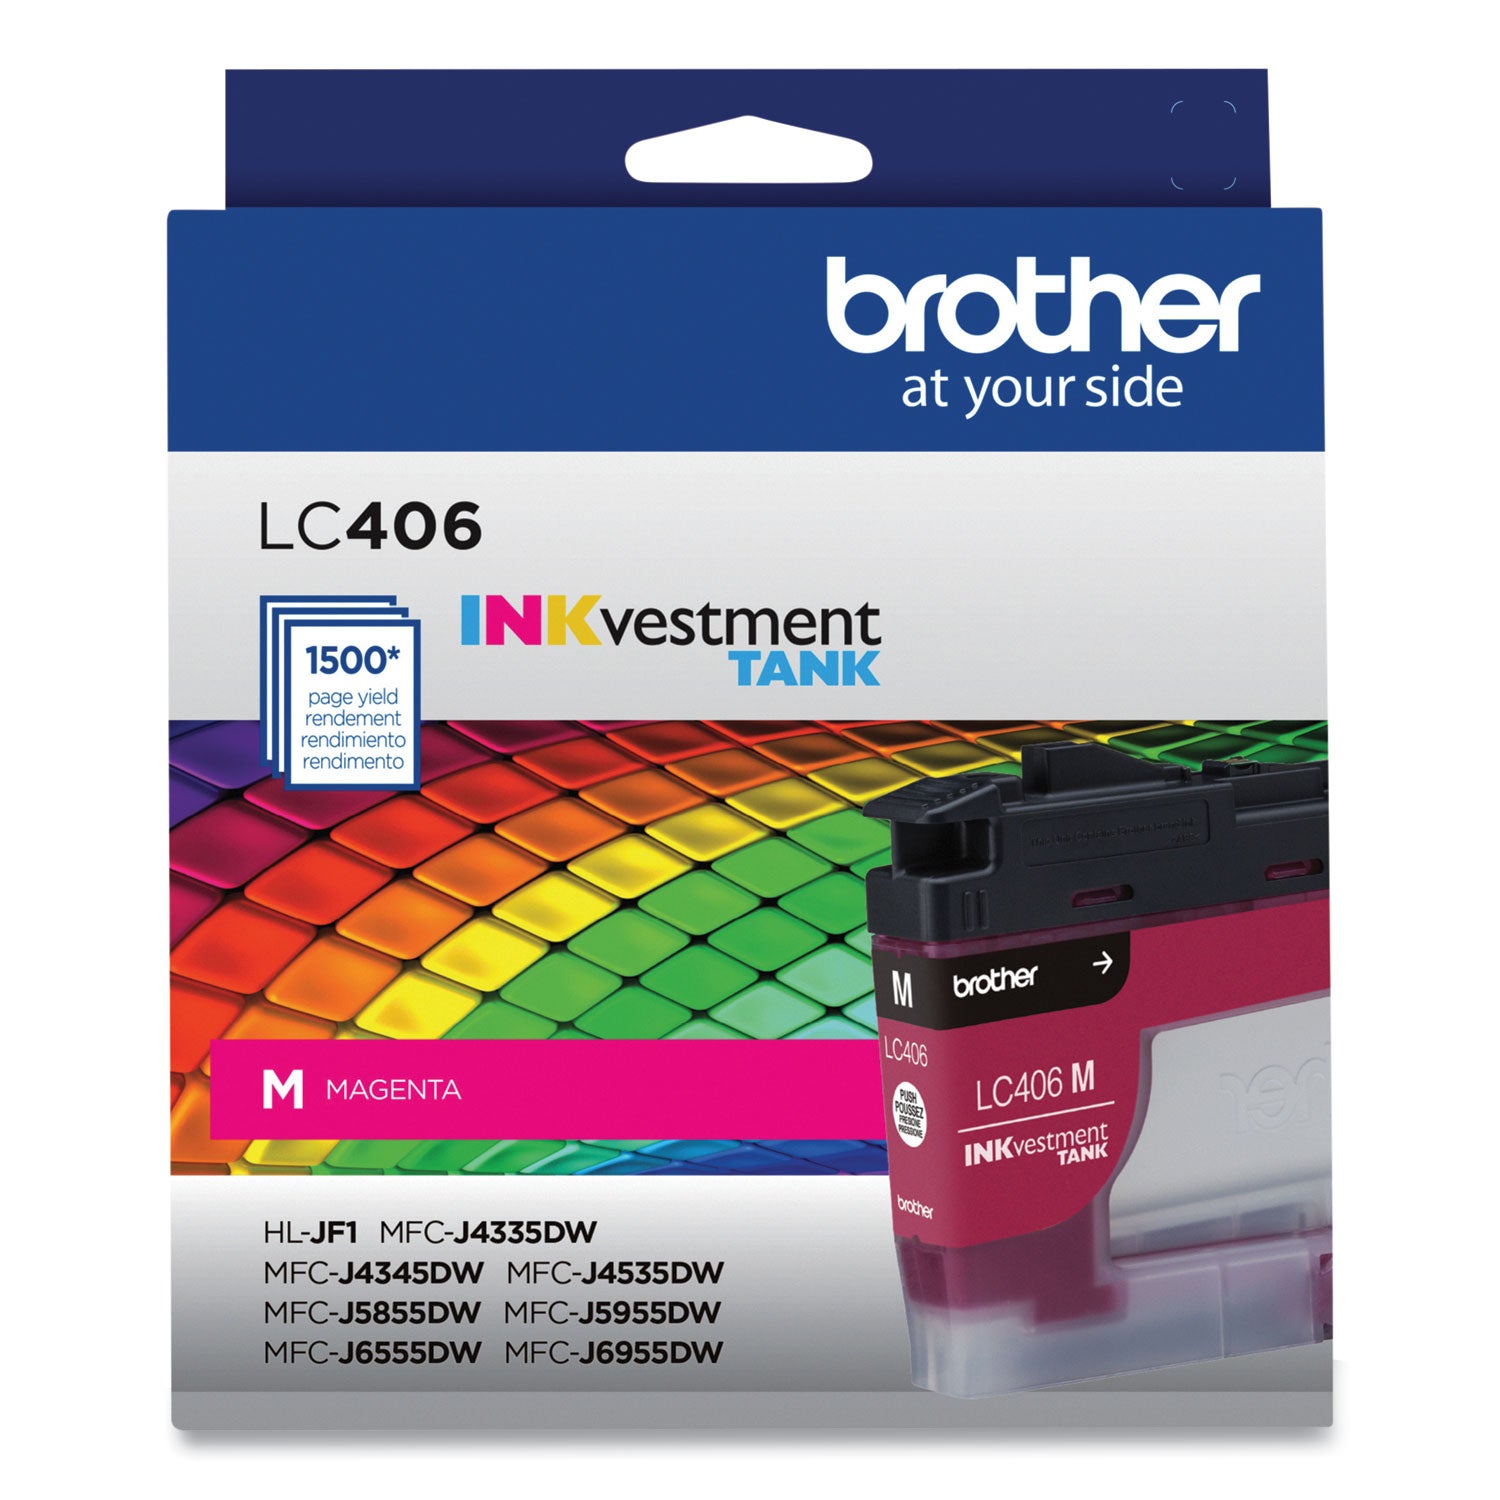 lc406ms-inkvestment-ink-1500-page-yield-magenta_brtlc406ms - 1